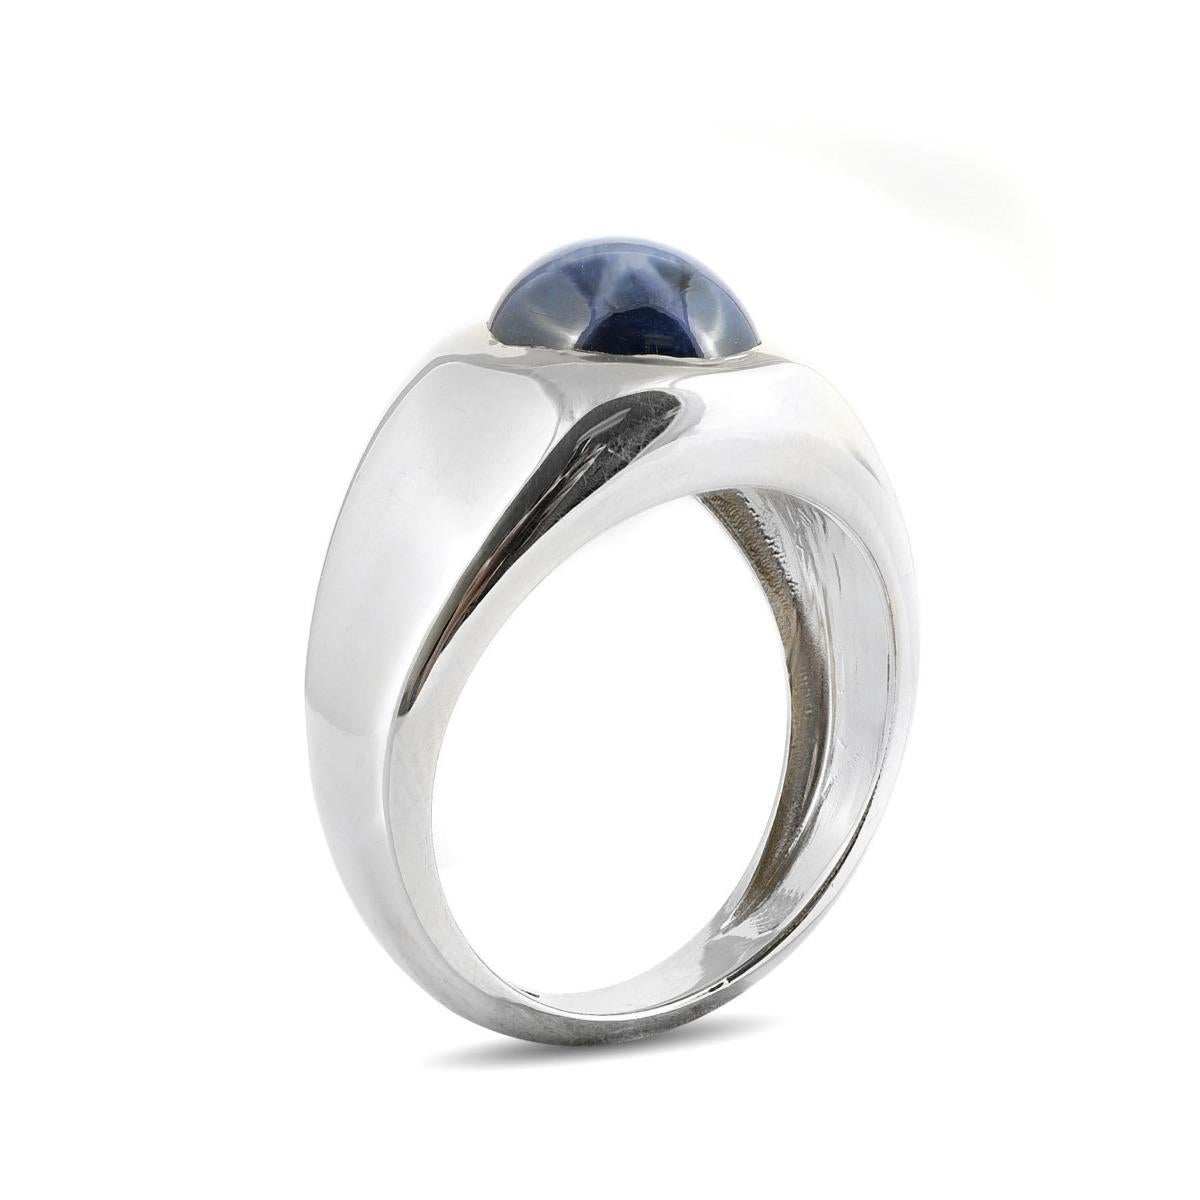 This bold white gold men's ring is a true standout, featuring a magnificent 7.96-carat Star Sapphire. The gem's hypnotic blue hues make the star pattern come alive, offering a mesmerizing and sharp six-rayed reflection that radiates from the center.